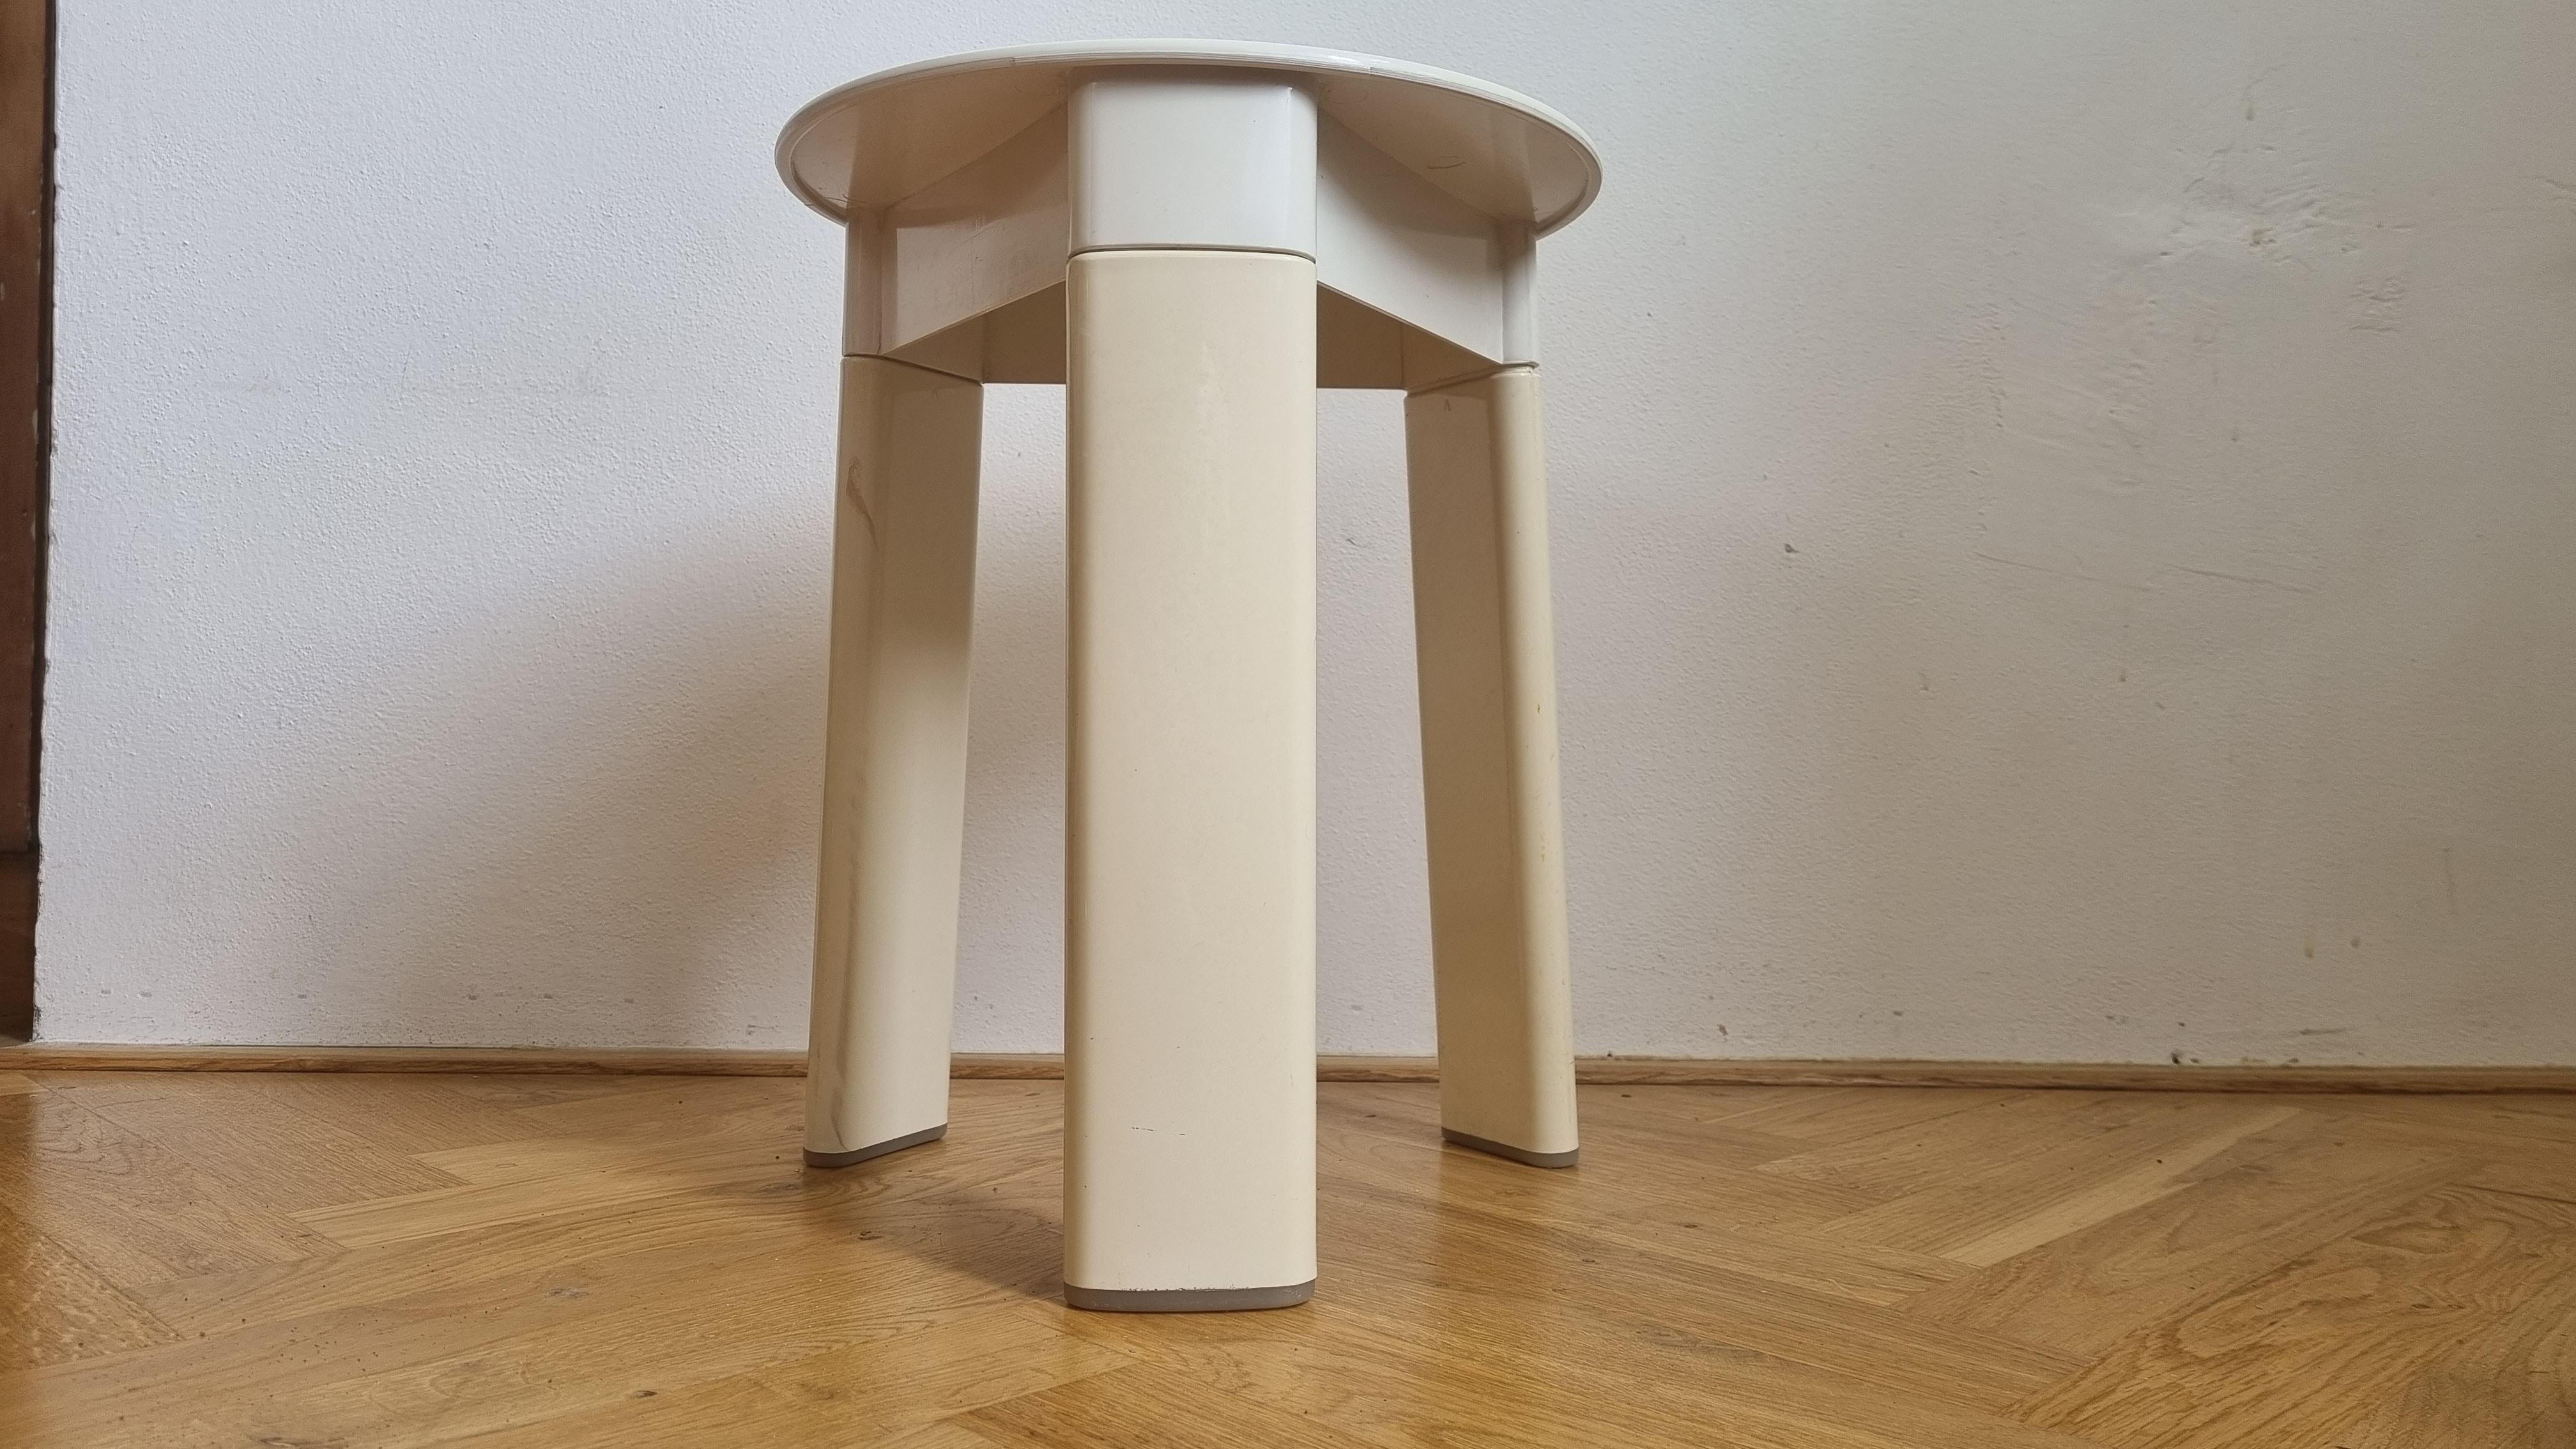 Midcentury Stool or Side Table Trio, Olaf Von Bohr for Gedy, Italy, 1970s For Sale 8